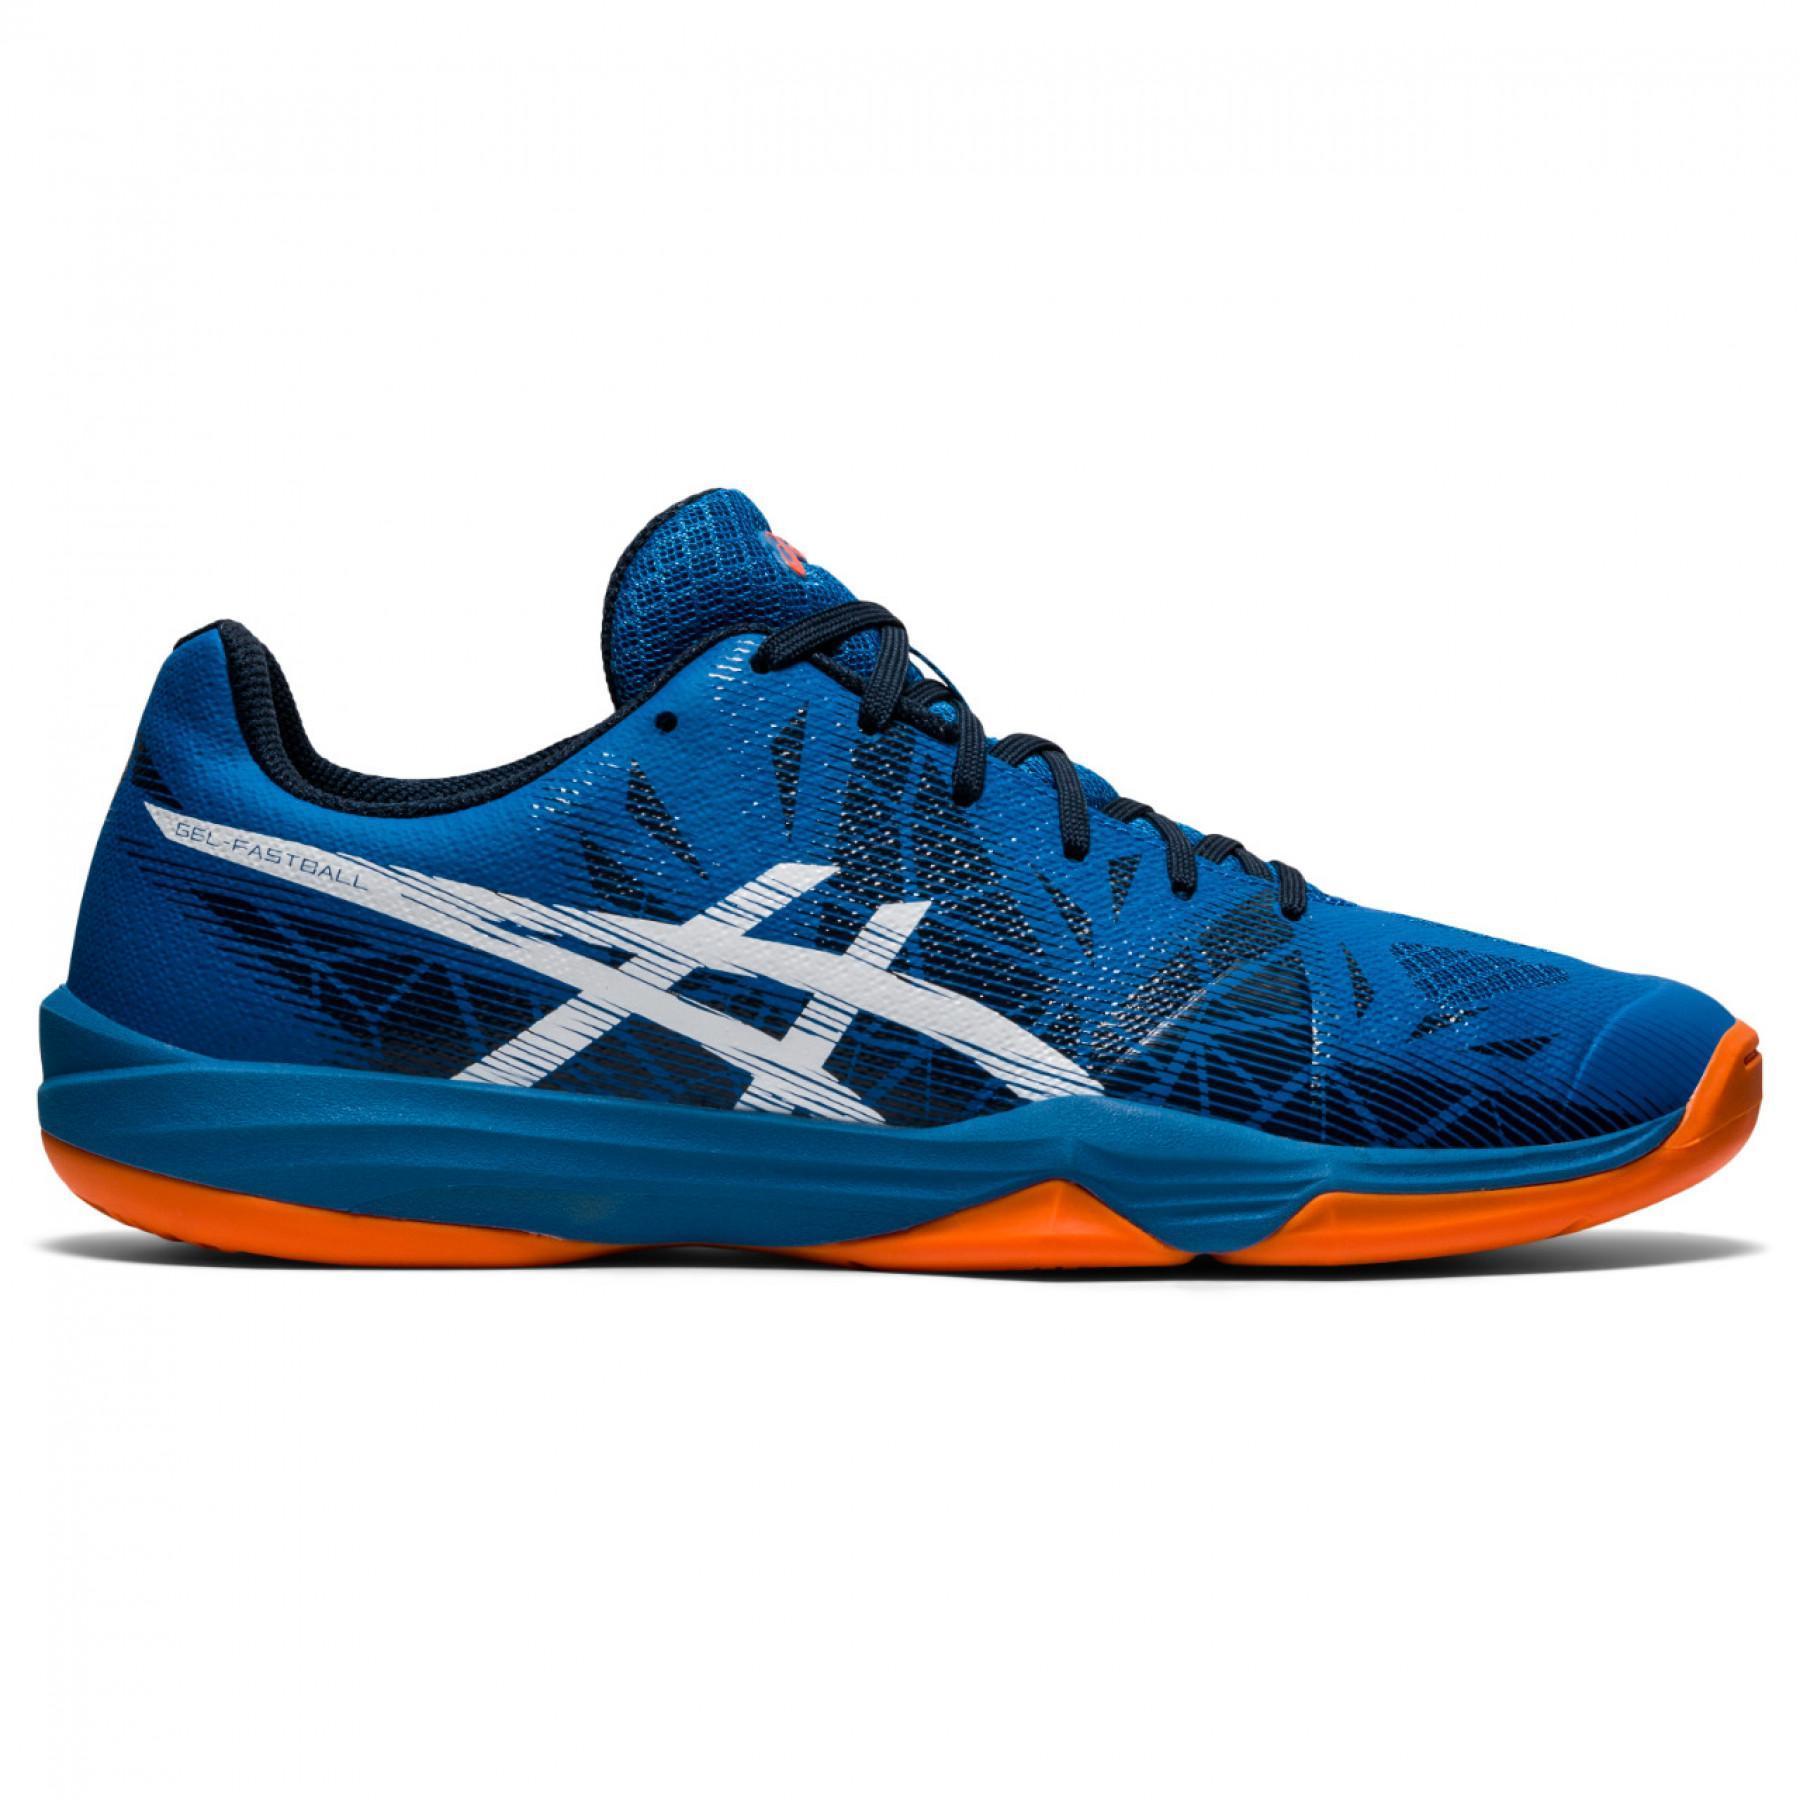 Shoes Asics Gel-Fastball 3